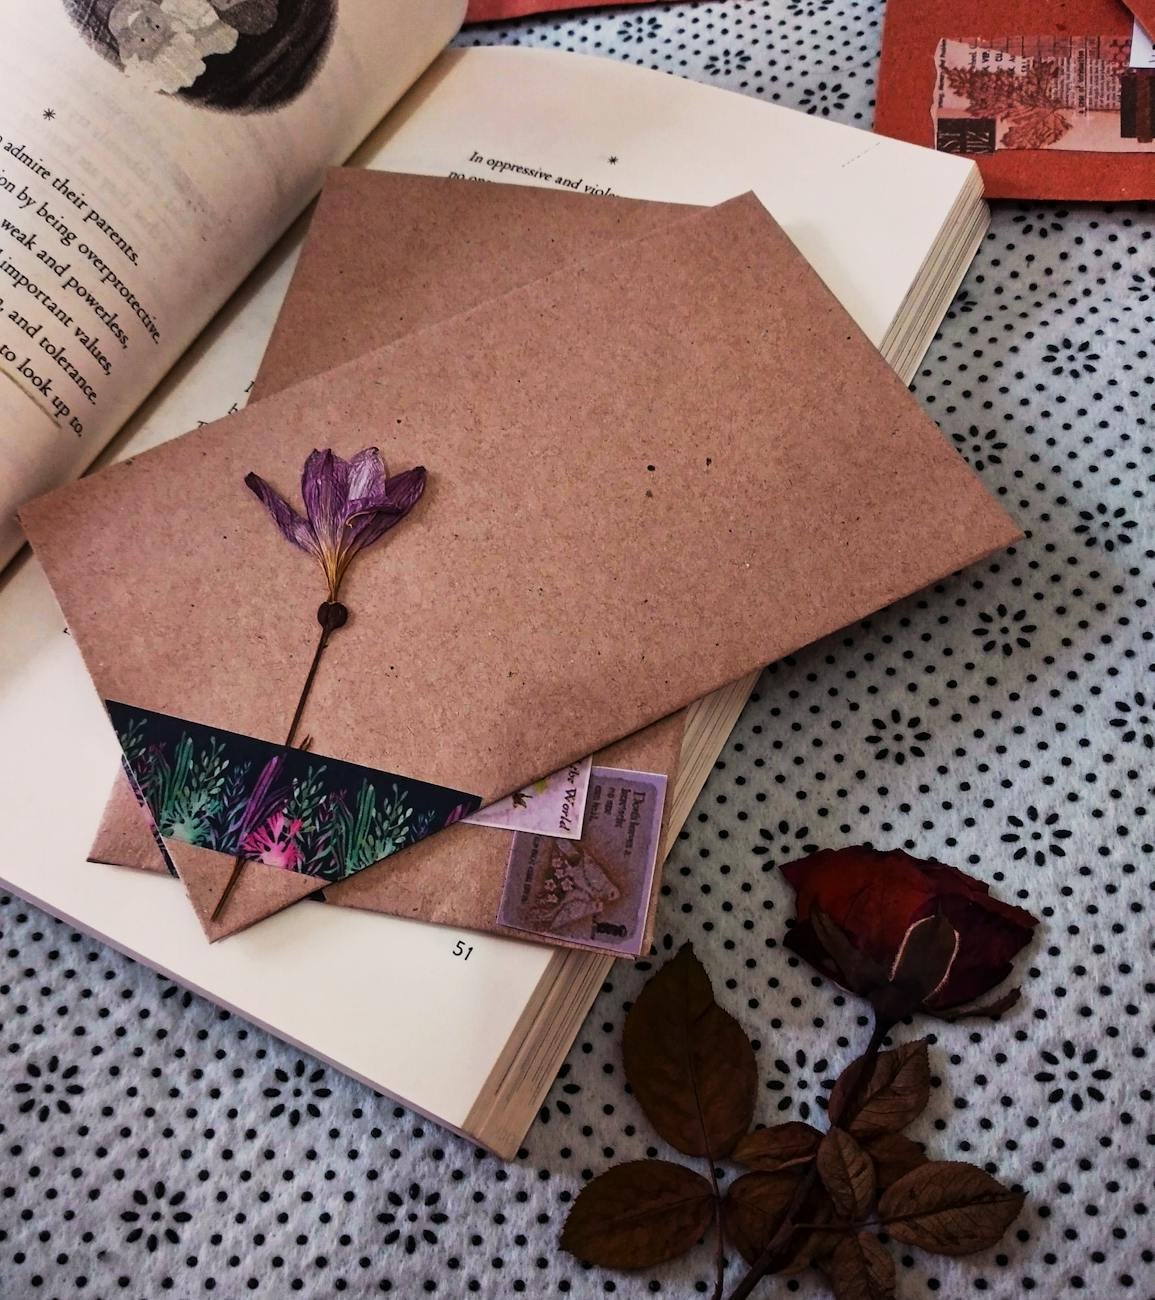 Photo by Ayesha Lucky on <a href="https://www.pexels.com/photo/brown-envelopes-with-flowers-and-stickers-inside-open-book-20664651/" rel="nofollow">Pexels.com</a>